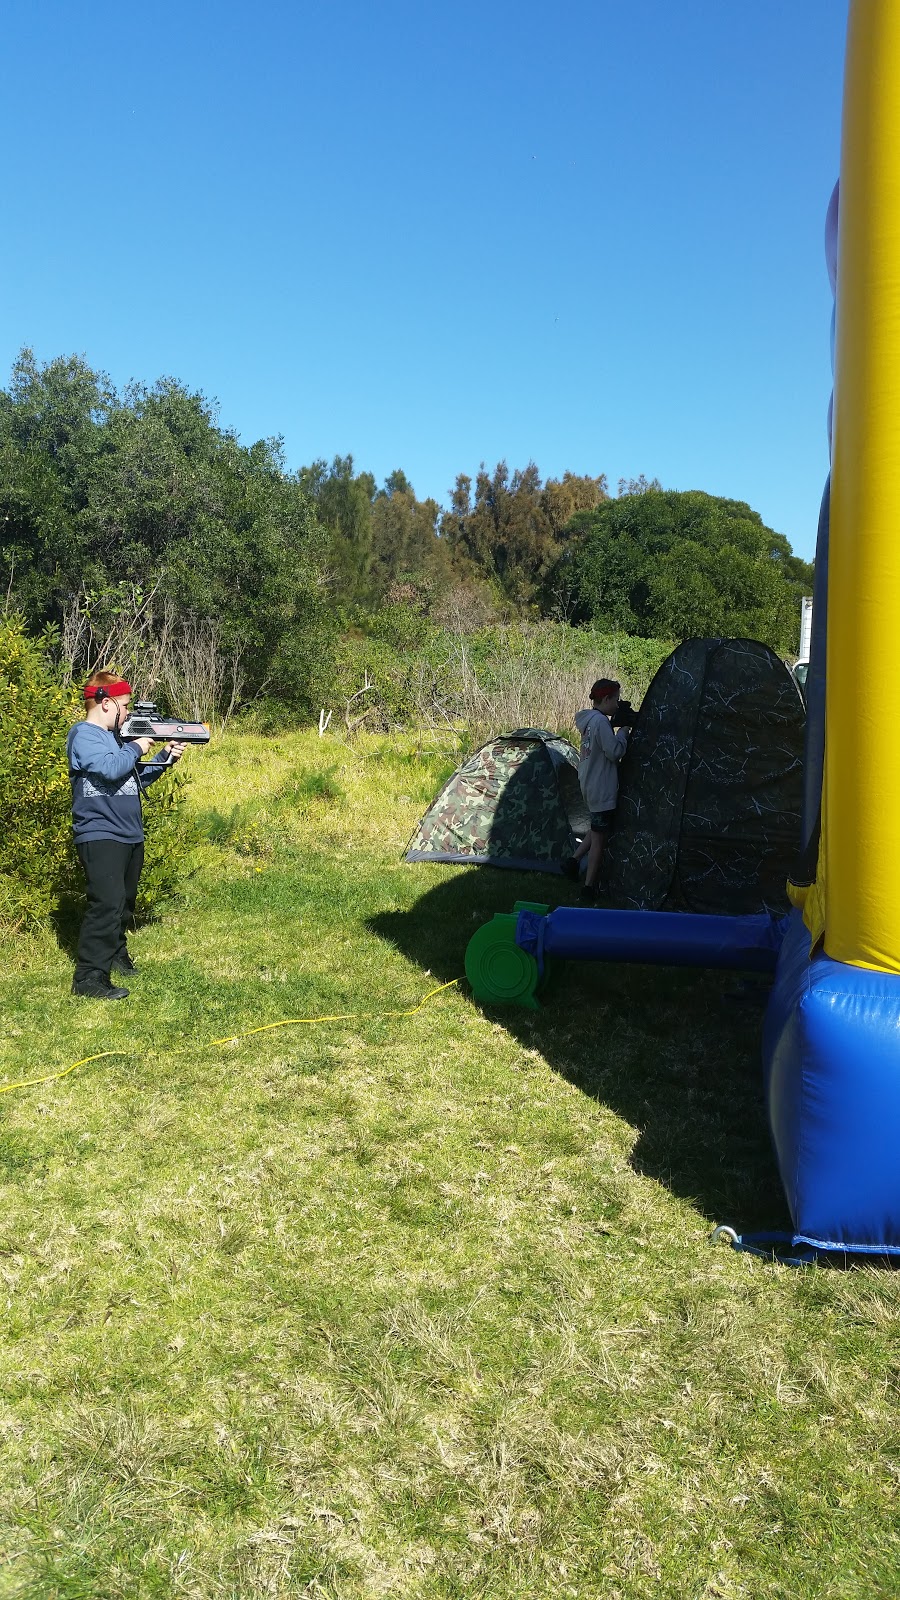 sir bounce a lot jumping castles and party hire | food | 42 Station Rd, Albion Park Rail NSW 2527, Australia | 0406053475 OR +61 406 053 475